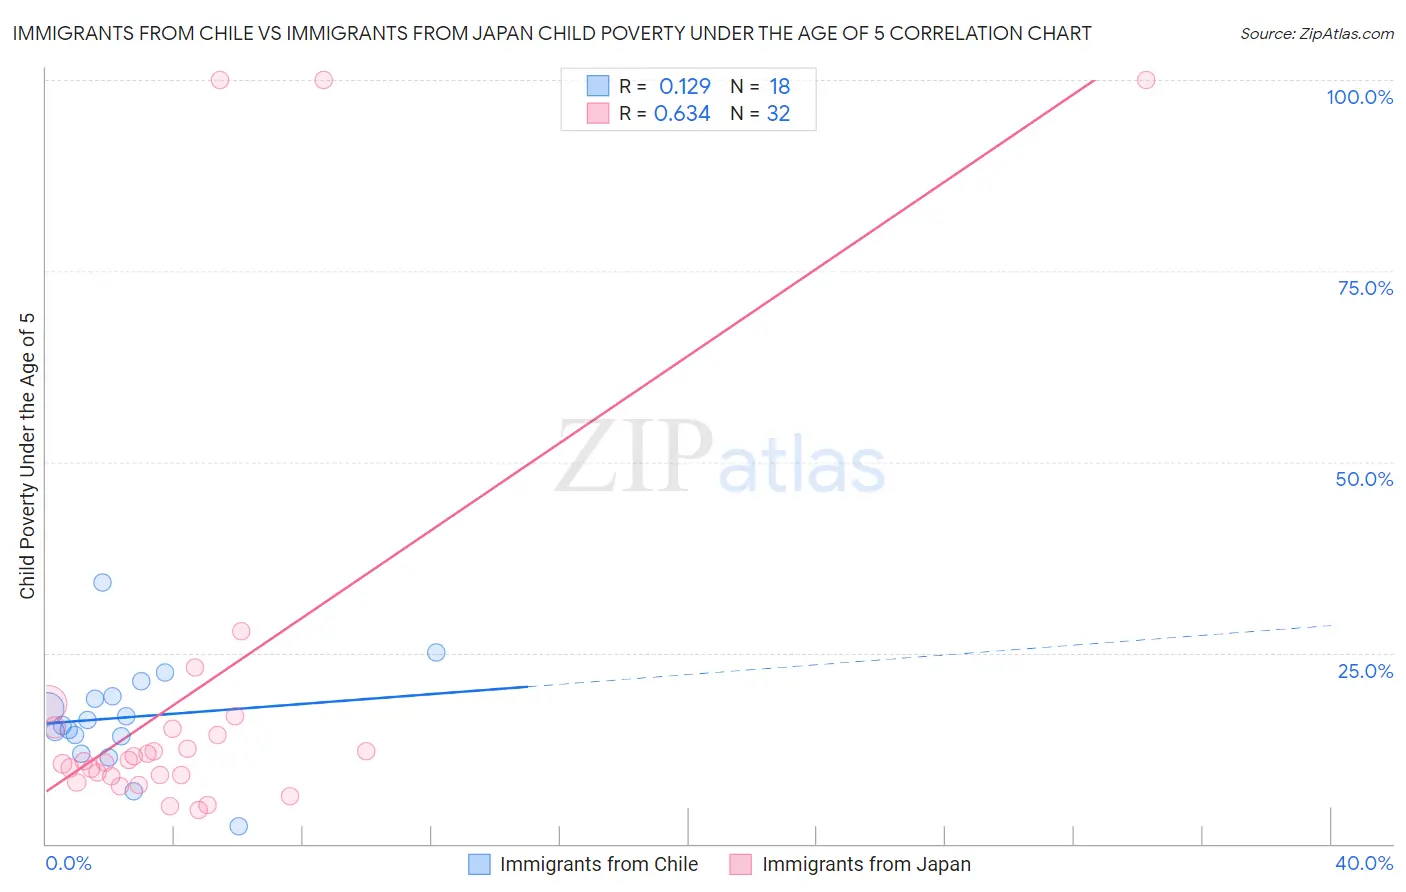 Immigrants from Chile vs Immigrants from Japan Child Poverty Under the Age of 5